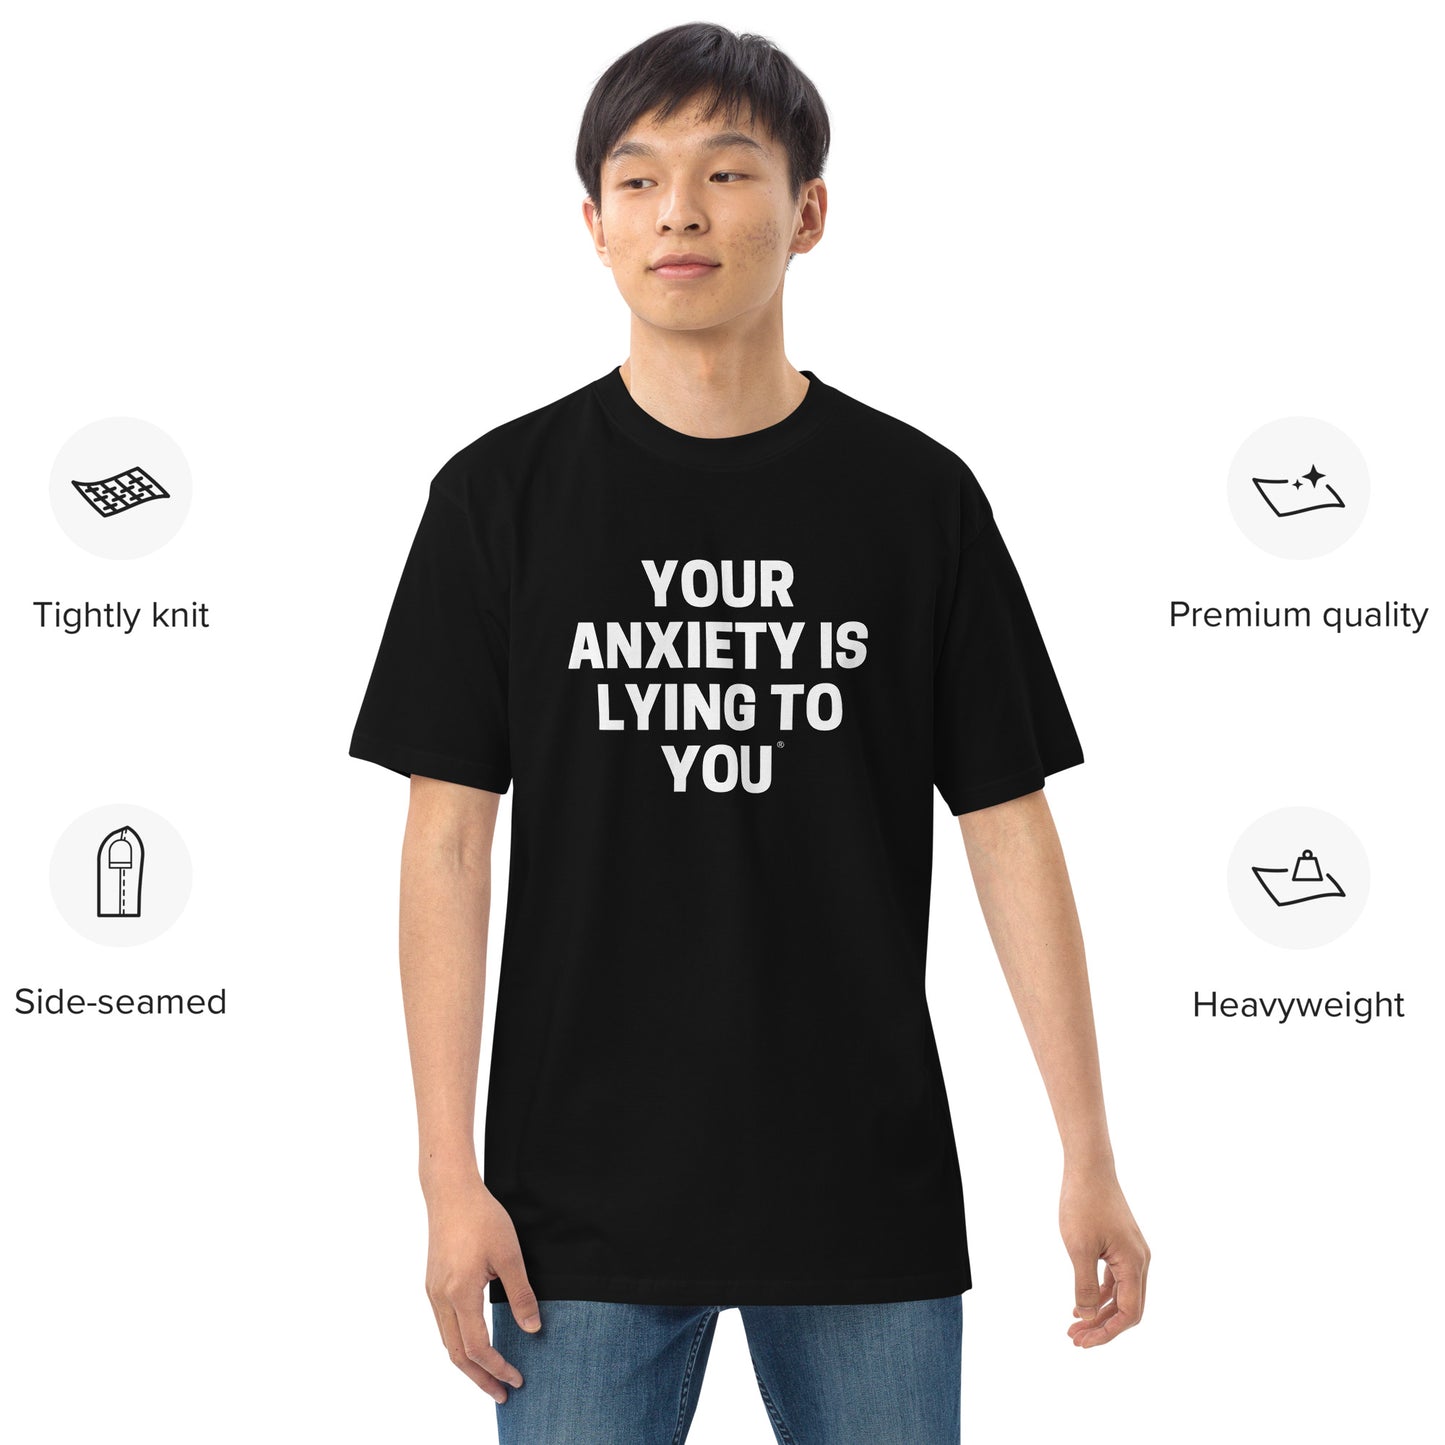 Your Anxiety is Lying to You- Men’s premium heavyweight tee